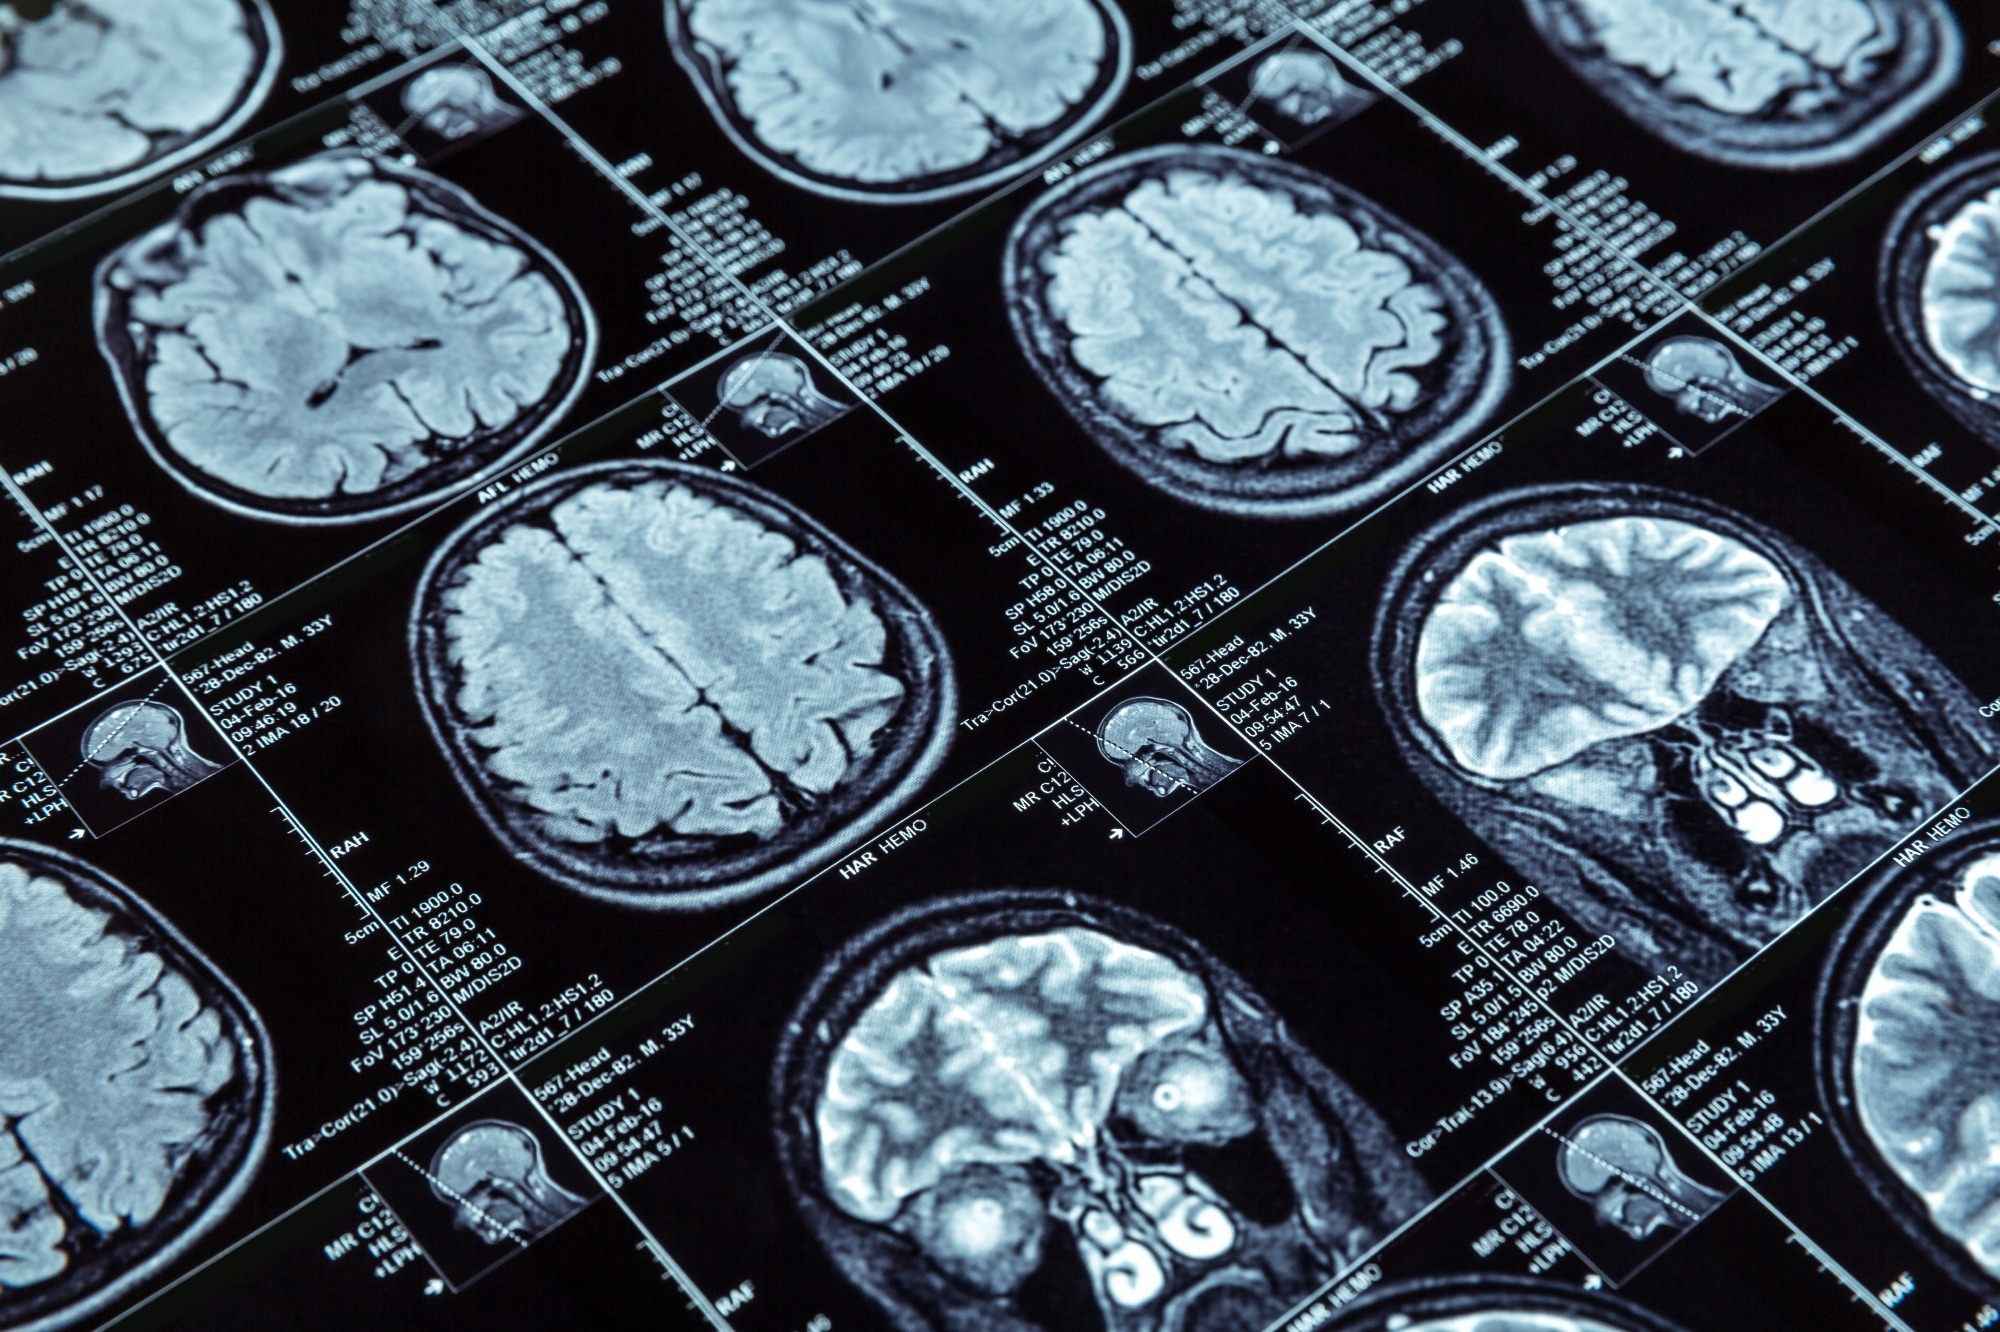 Study: Using brain structural neuroimaging measures to predict psychosis onset for individuals at clinical high-risk. Image Credit: Nomad_Soul/Shutterstock.com